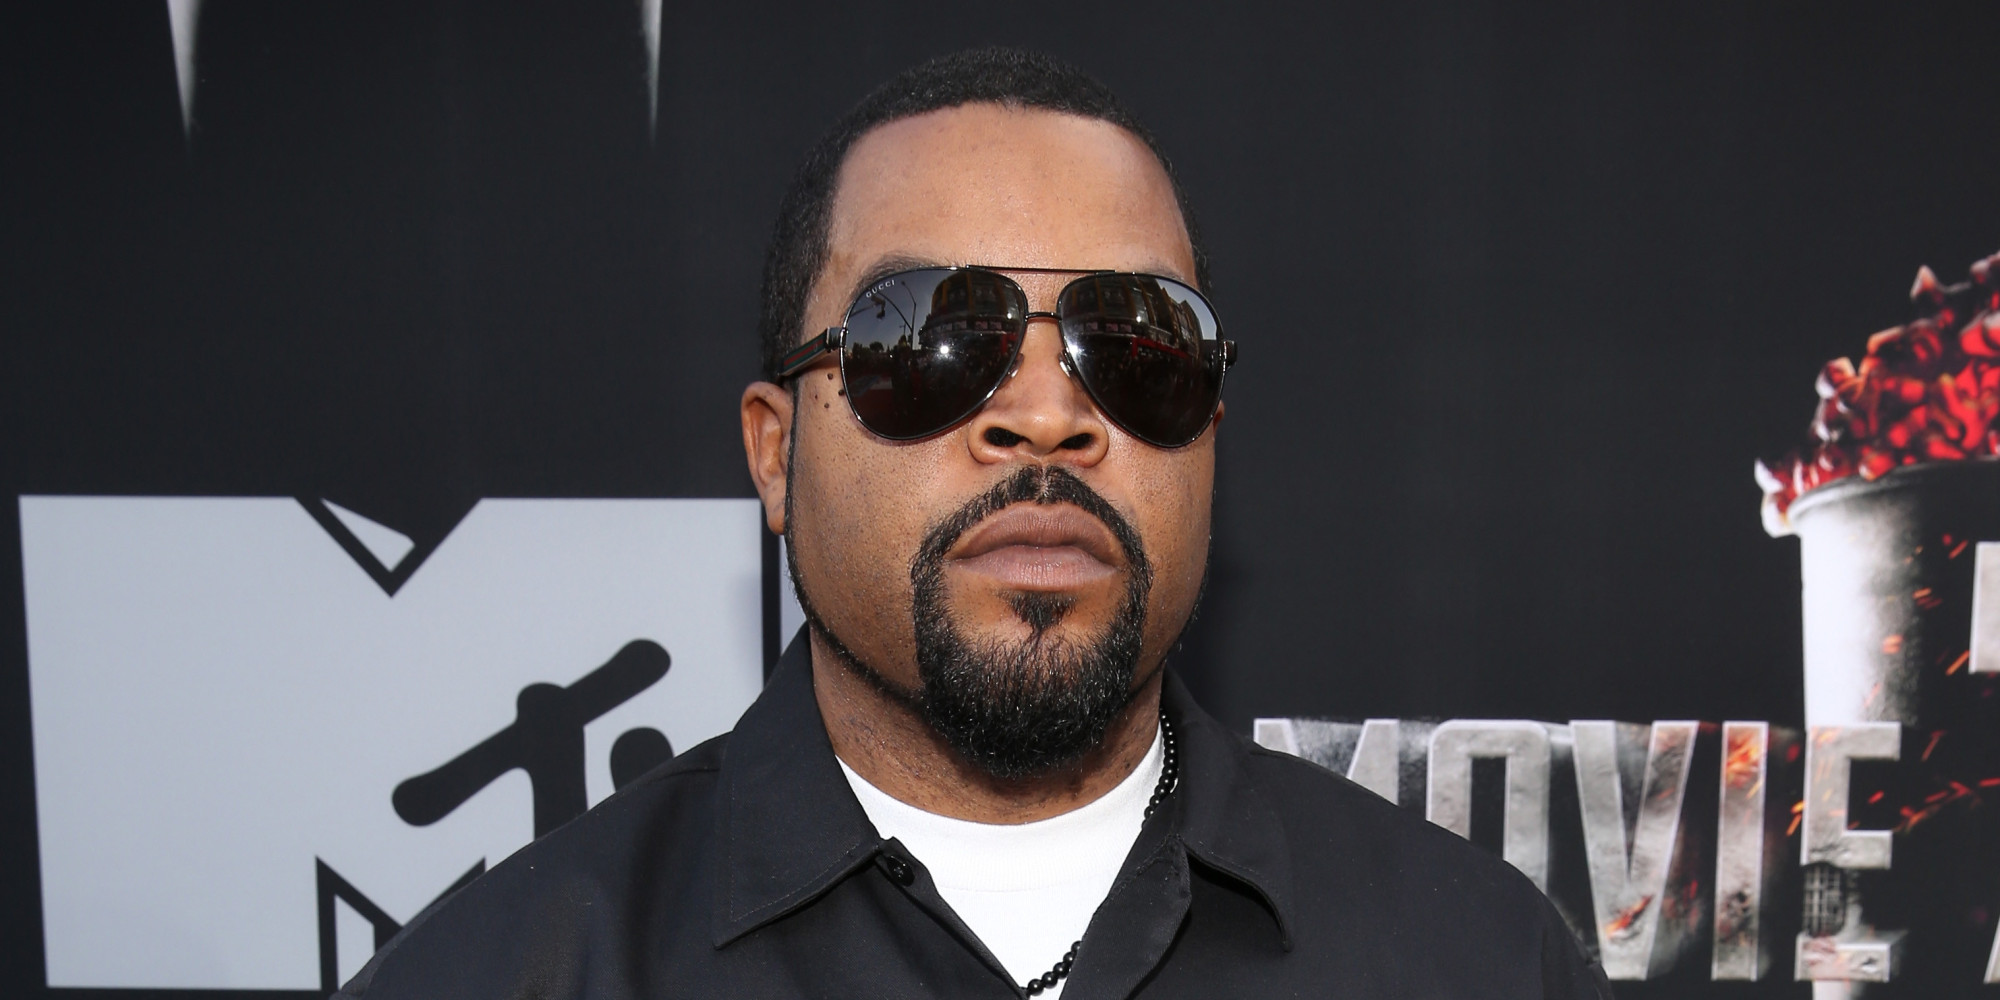 Is Ice Cube rich?